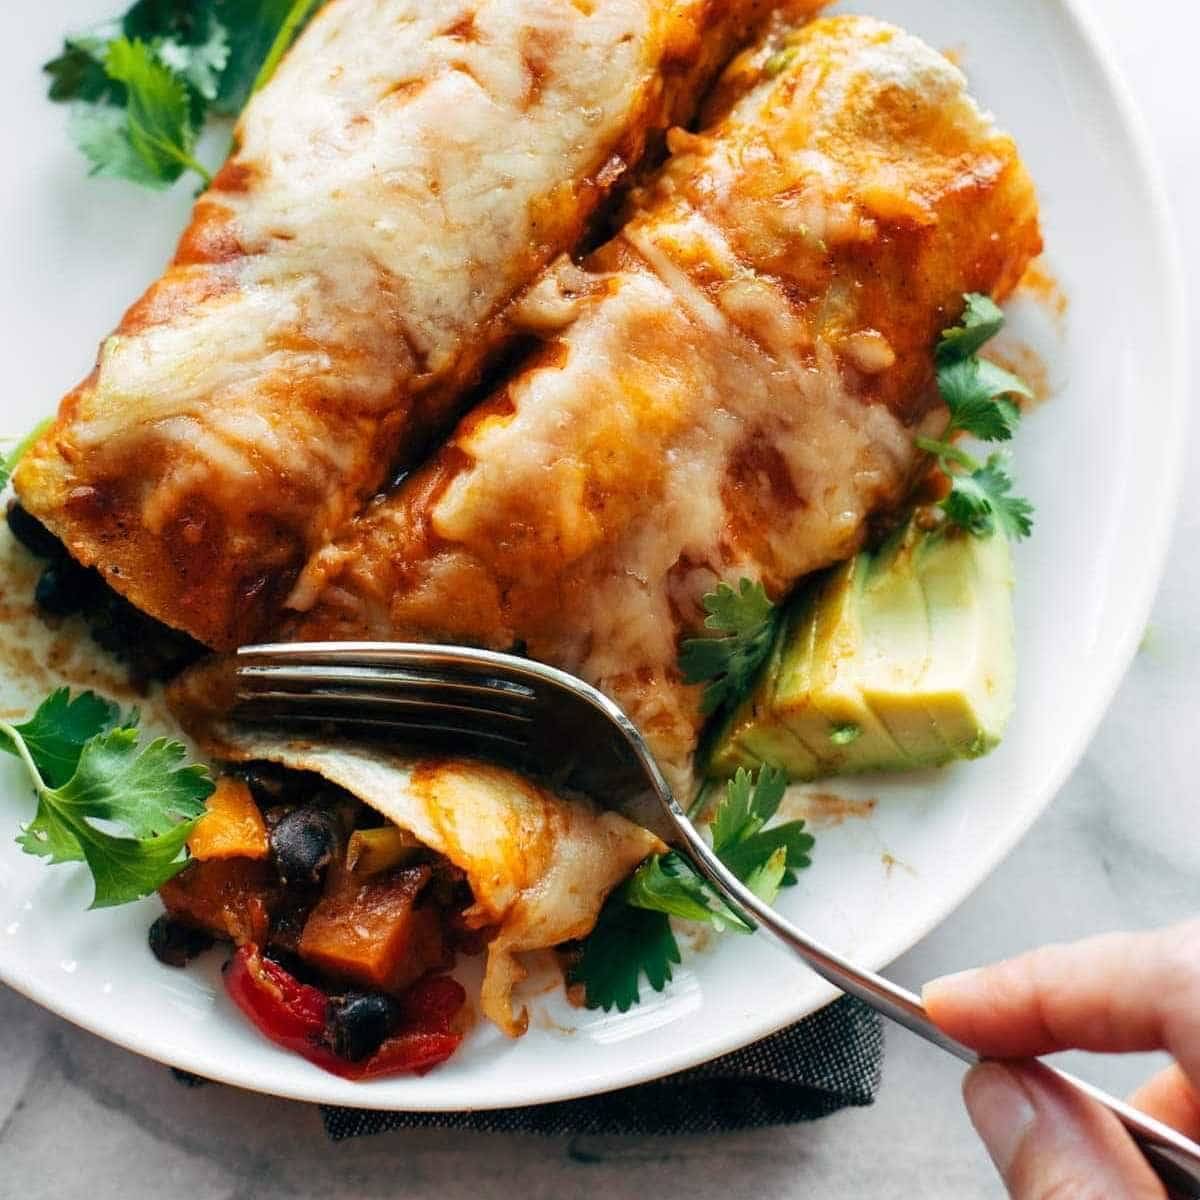 Person cutting an enchilada full of veggies and covered in sauce and cheese.